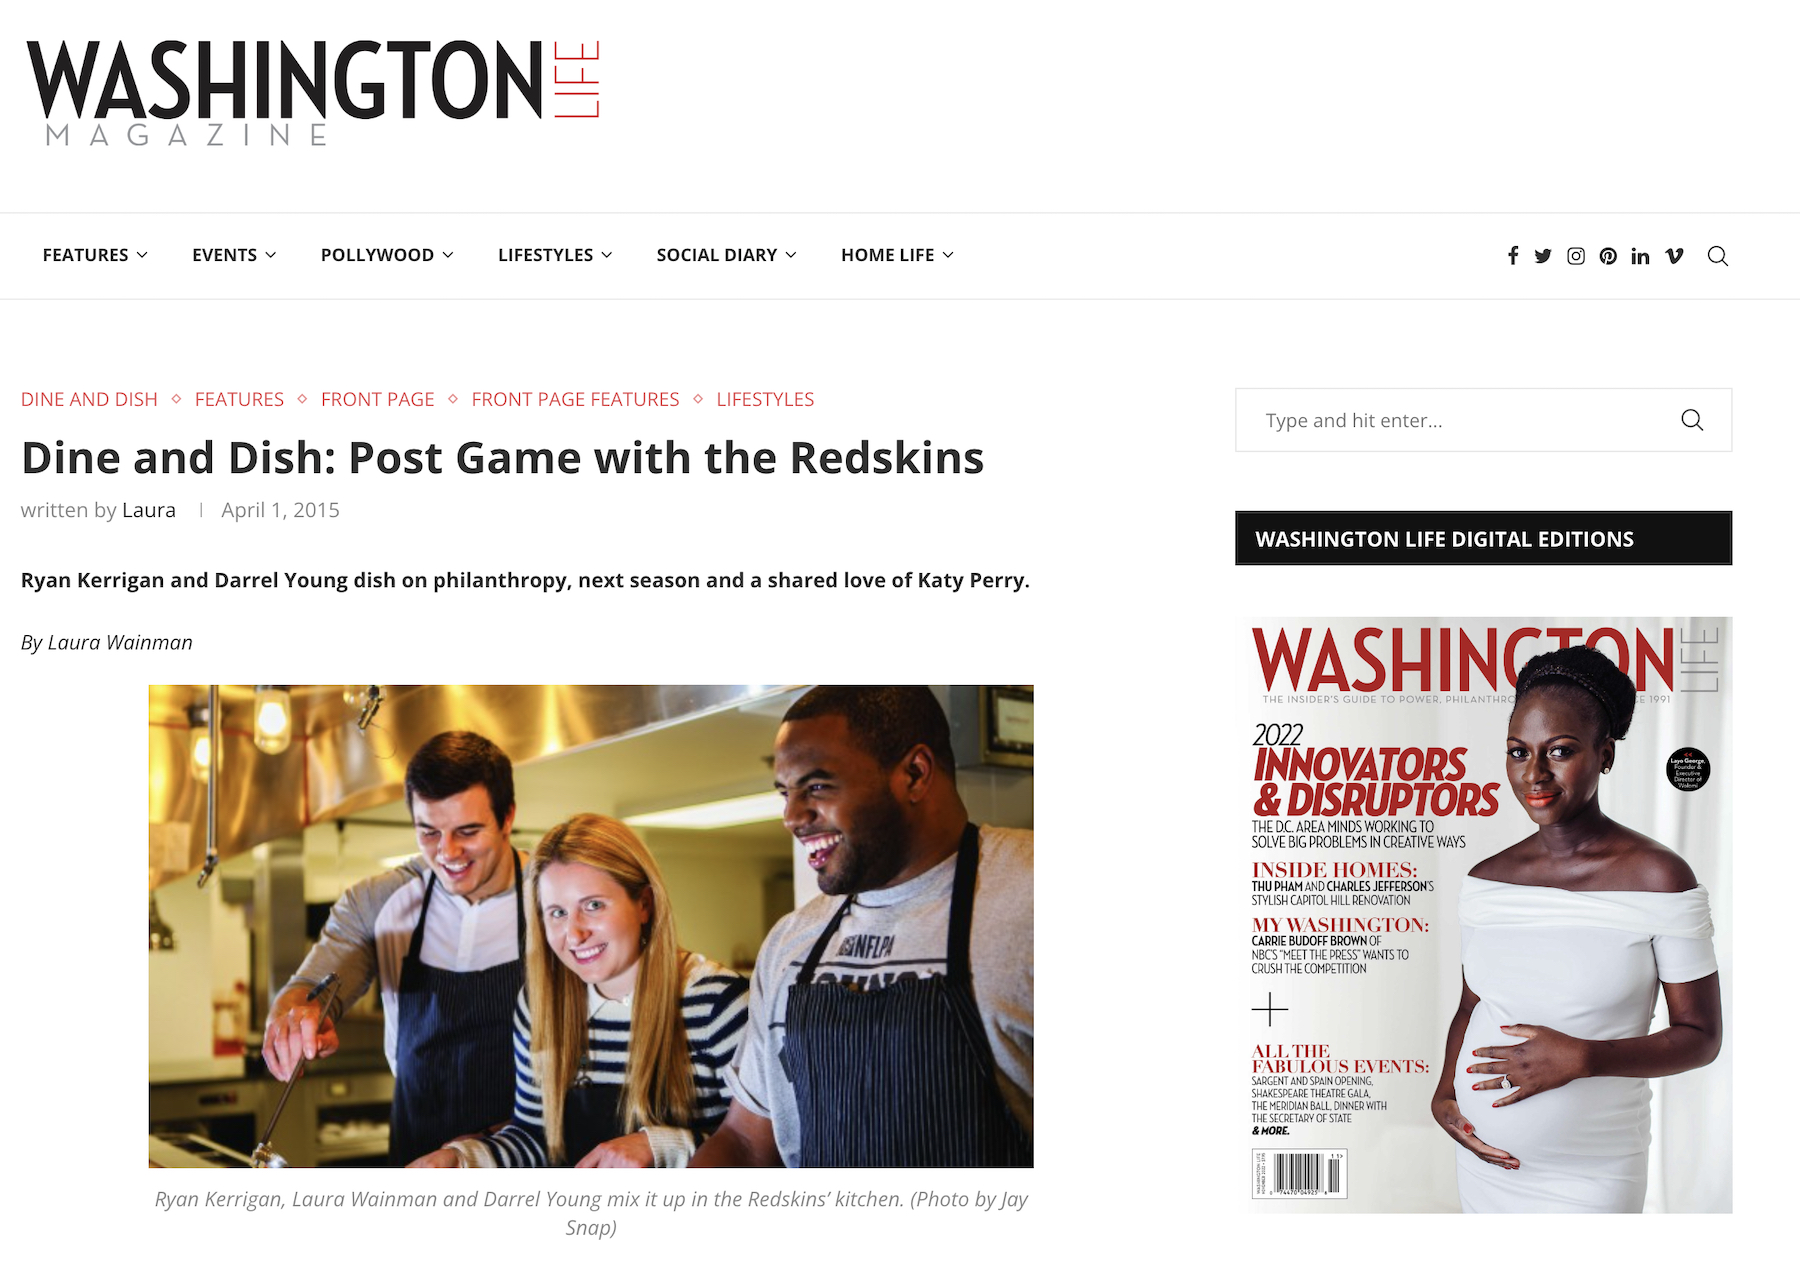 Ryan Kerrigan, Laura Wainman and Darrel Young mix it up in Redskins(Commanders) Kitchen - Photo by Jay Snap